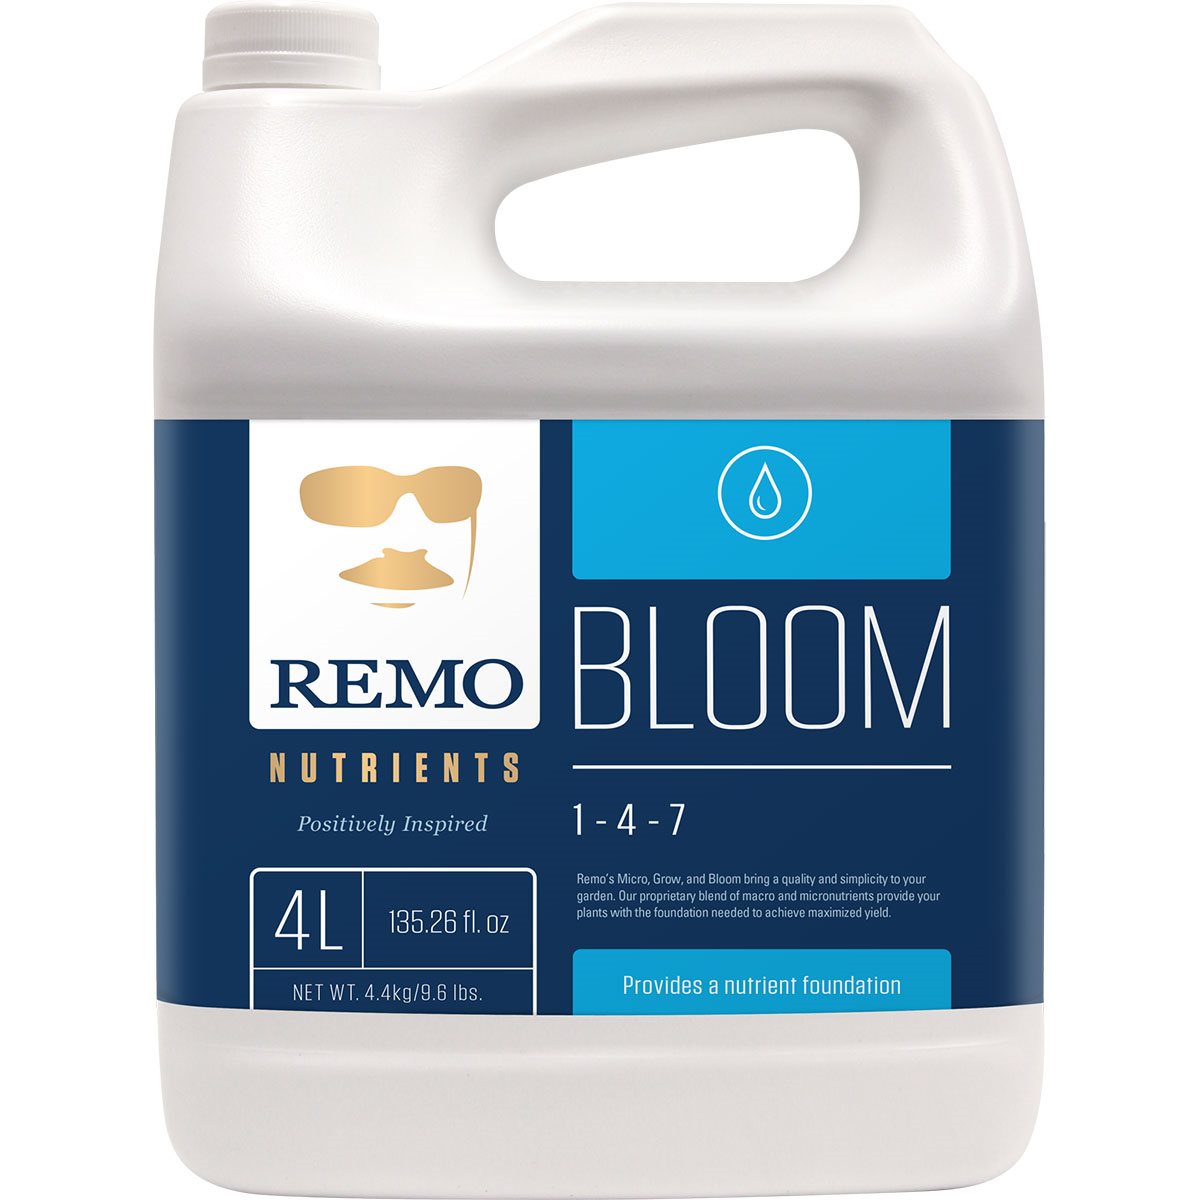 Product Secondary Image:Remo Nutrients Bloom (1-4-7)